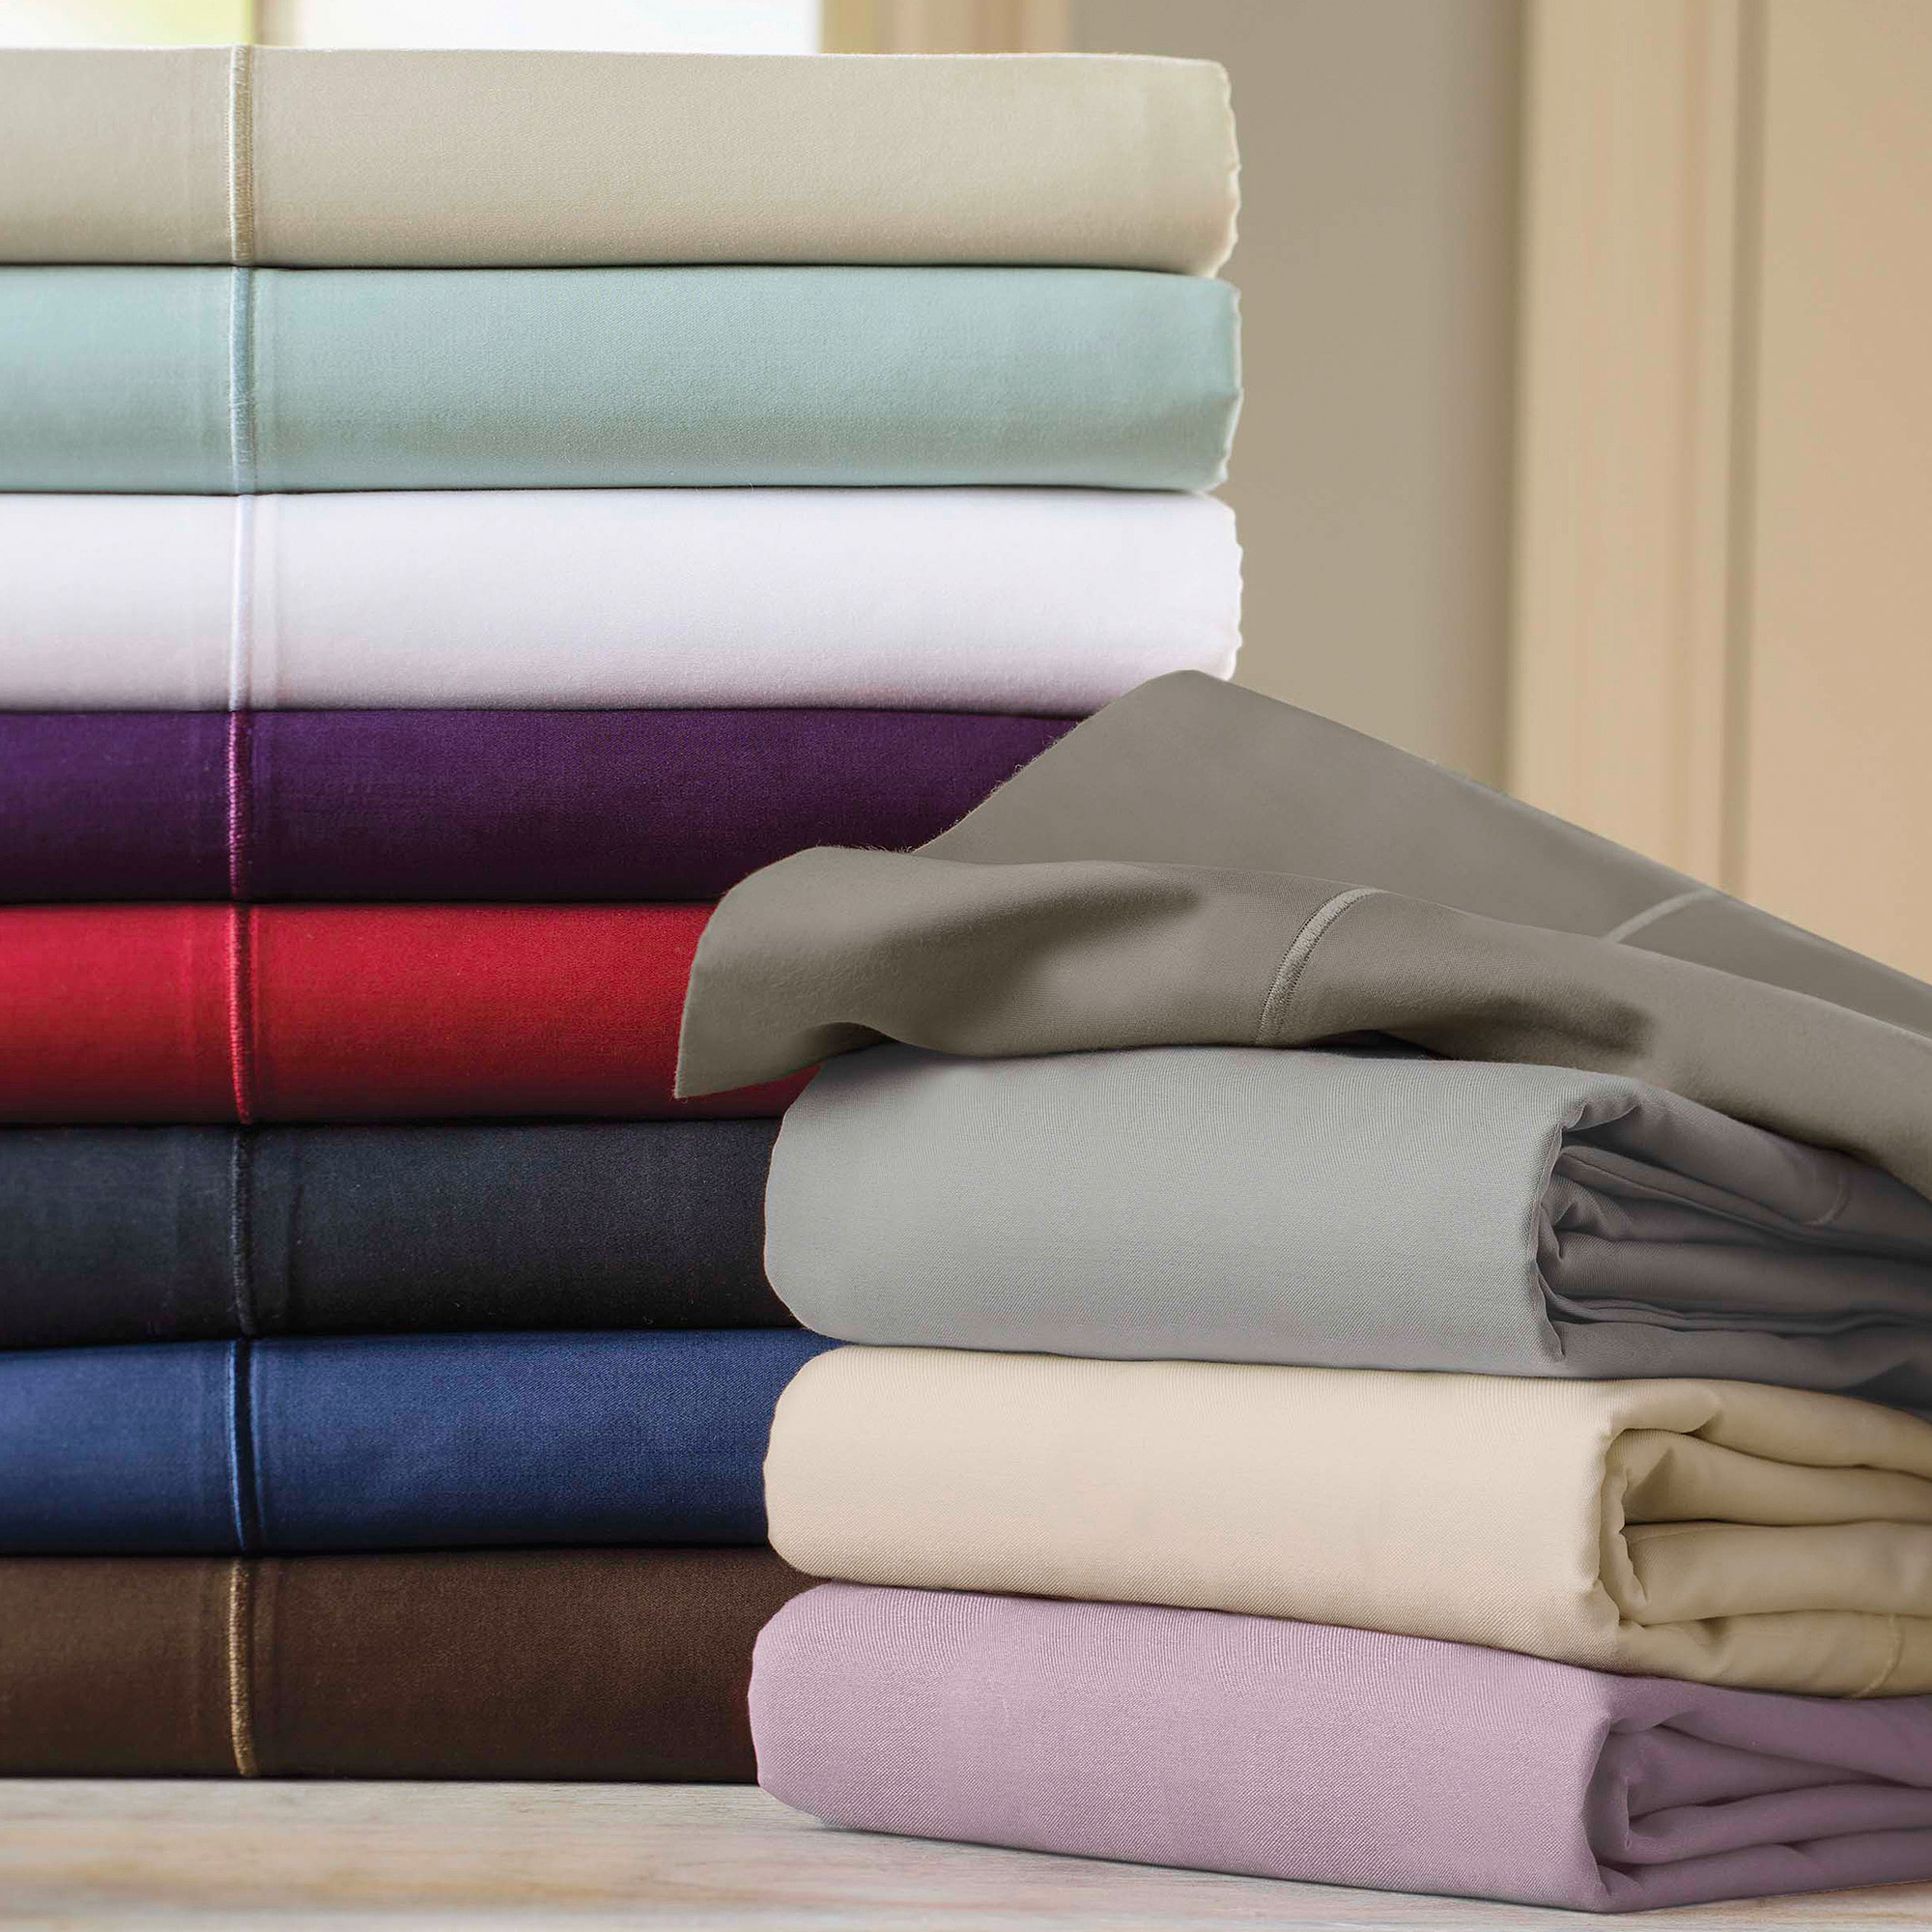 Better Homes and Gardens 400 Thread Count Egyptian Cotton Sheet Set - image 1 of 2